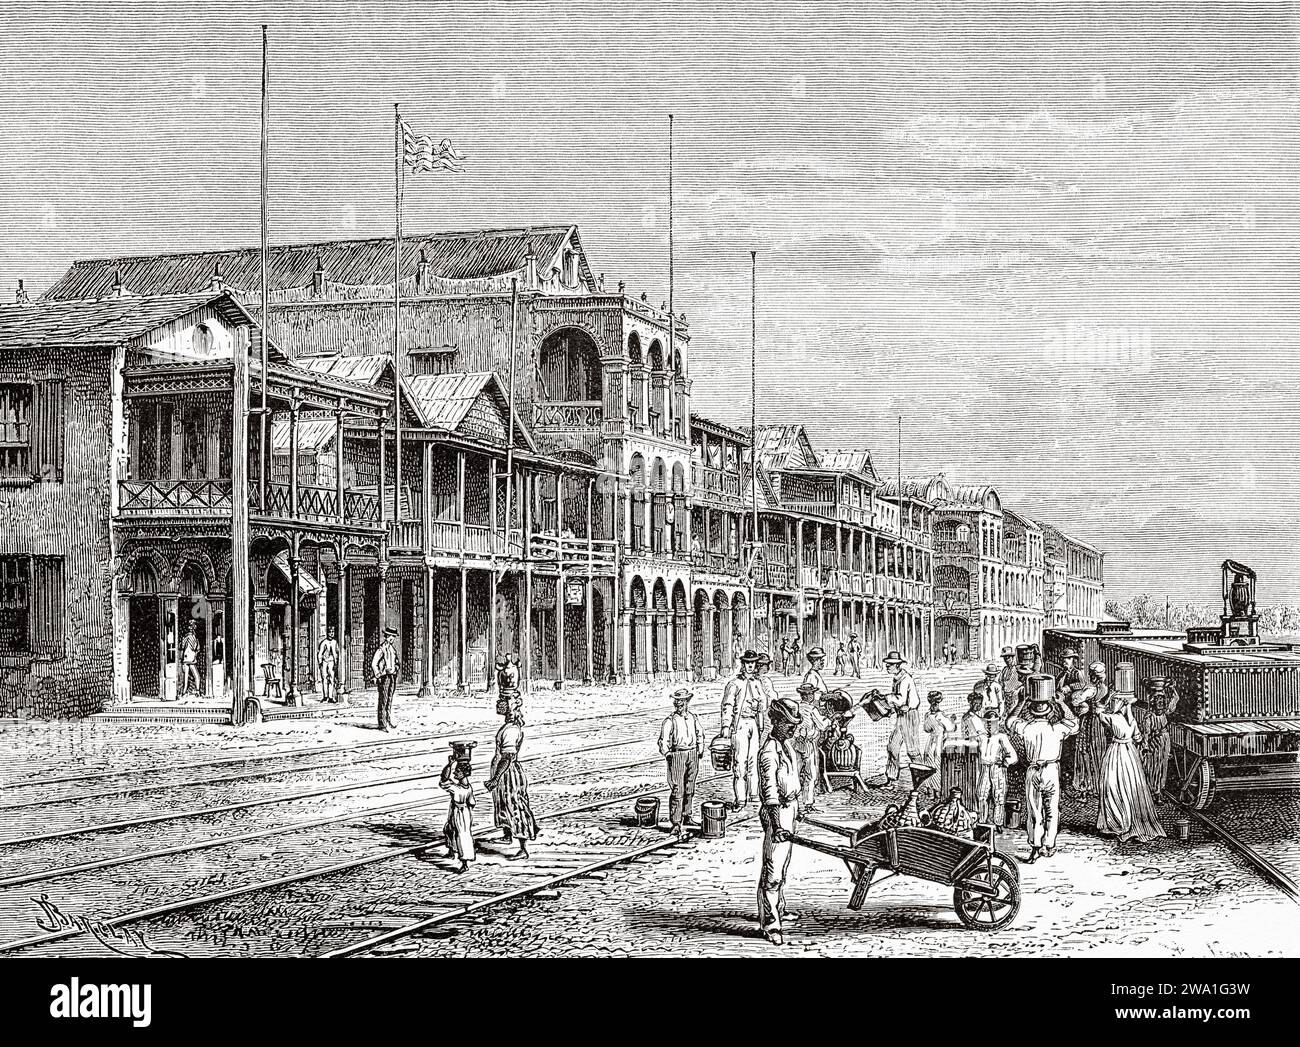 Front Street of Colon, Republic of Panama. Central America. Explorations in the Isthmus of Panama and Darien 1876-1878 by Armand Reclus (1843 - 1927) Old 19th century engraving from Le Tour du Monde 1880 Stock Photo